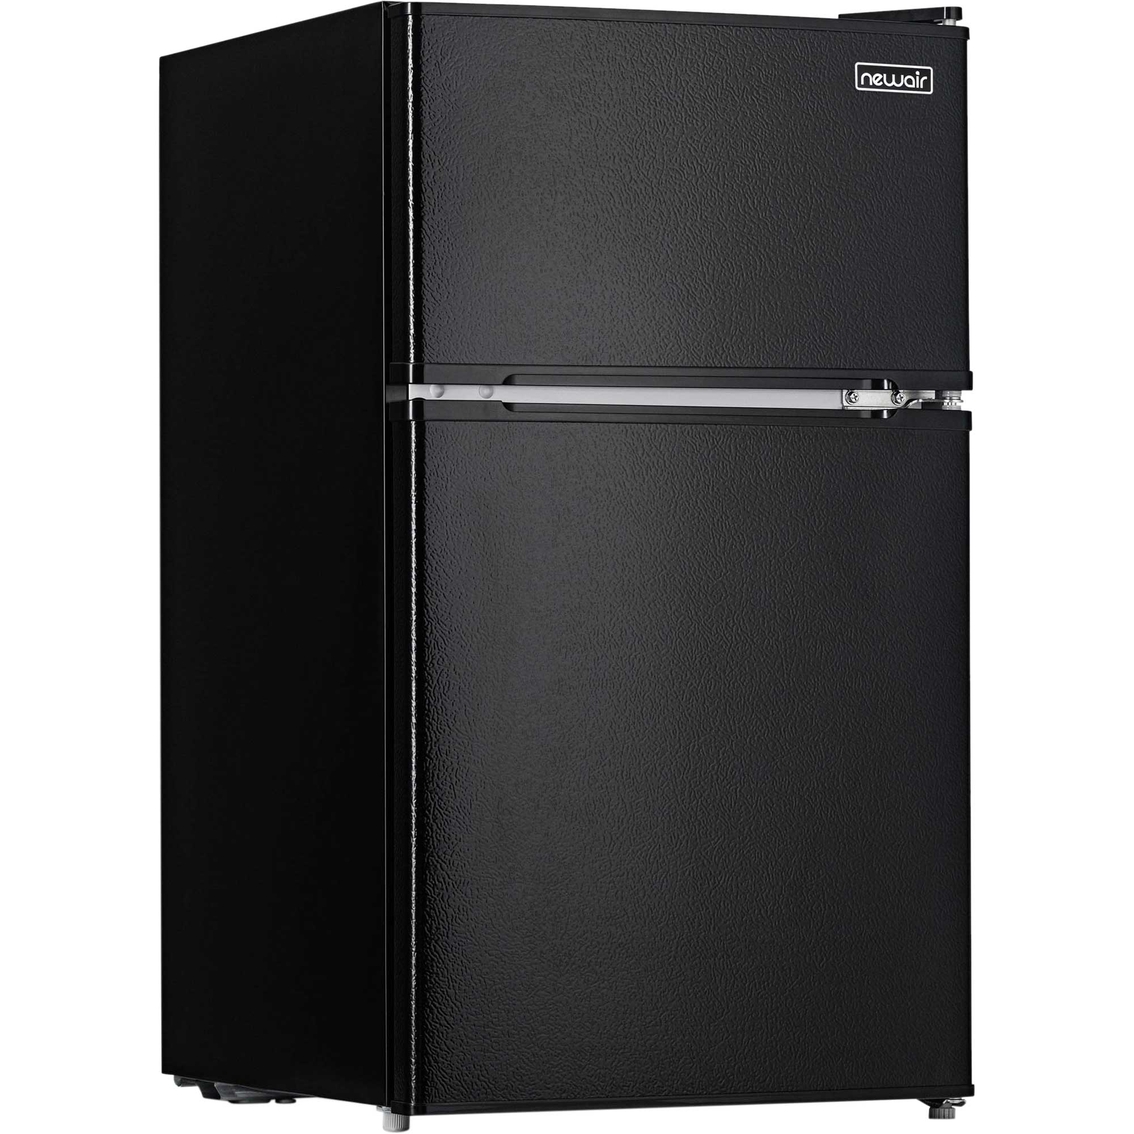 New Air LLC Compact Mini Refrigerator with Freezer and Can Dispenser - Image 2 of 10